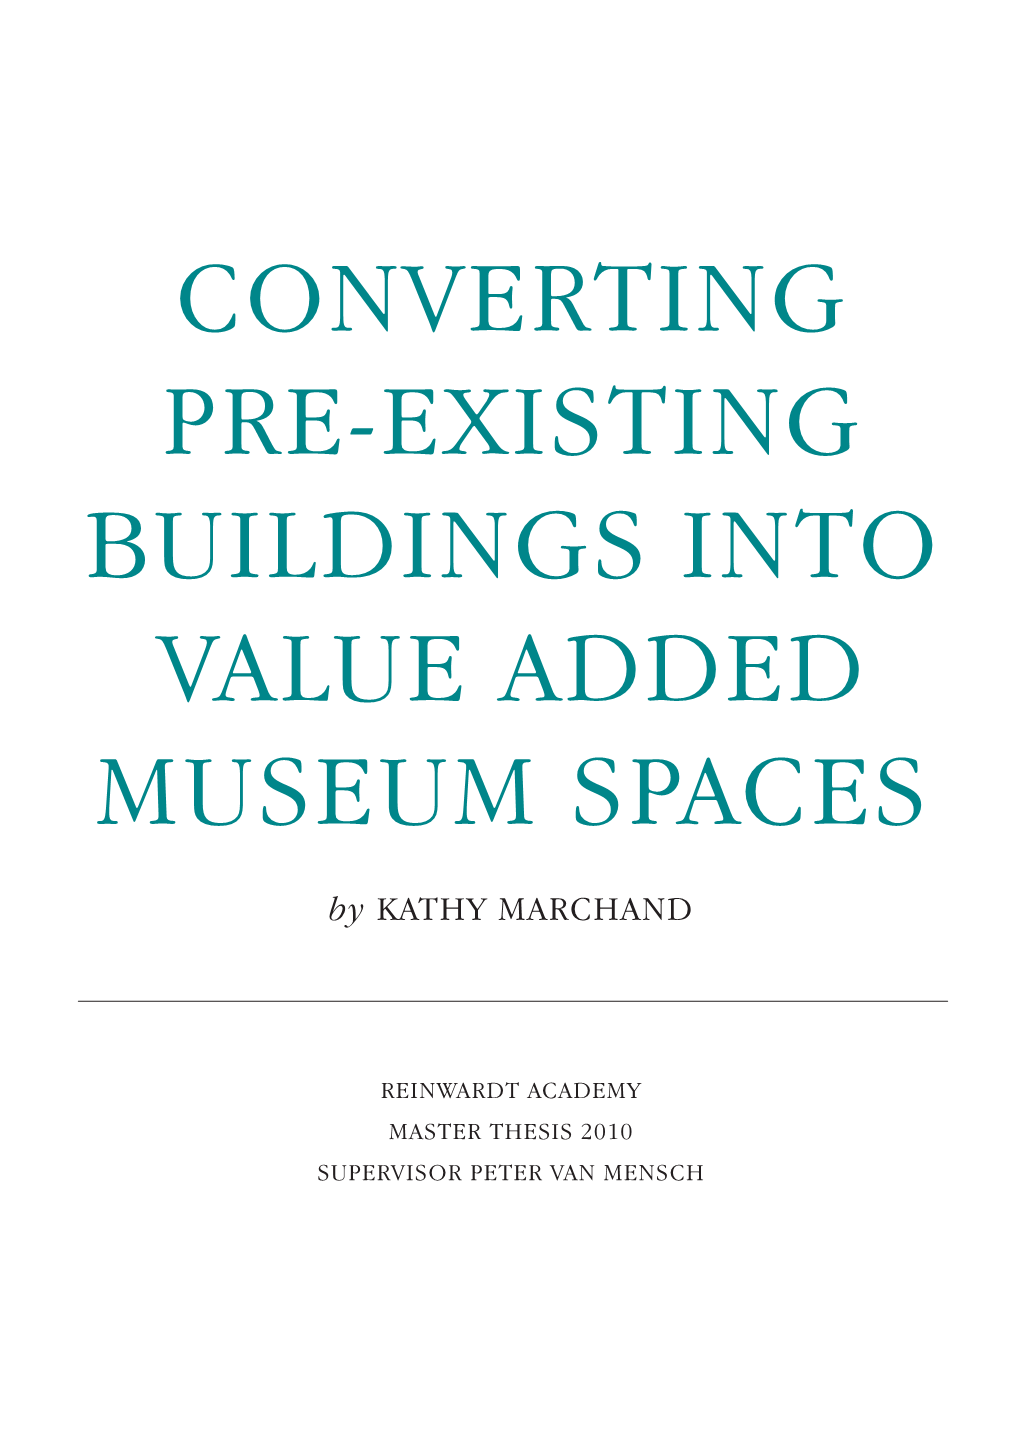 Converting Pre-Existing Buildings Into Value Added Museum Spaces